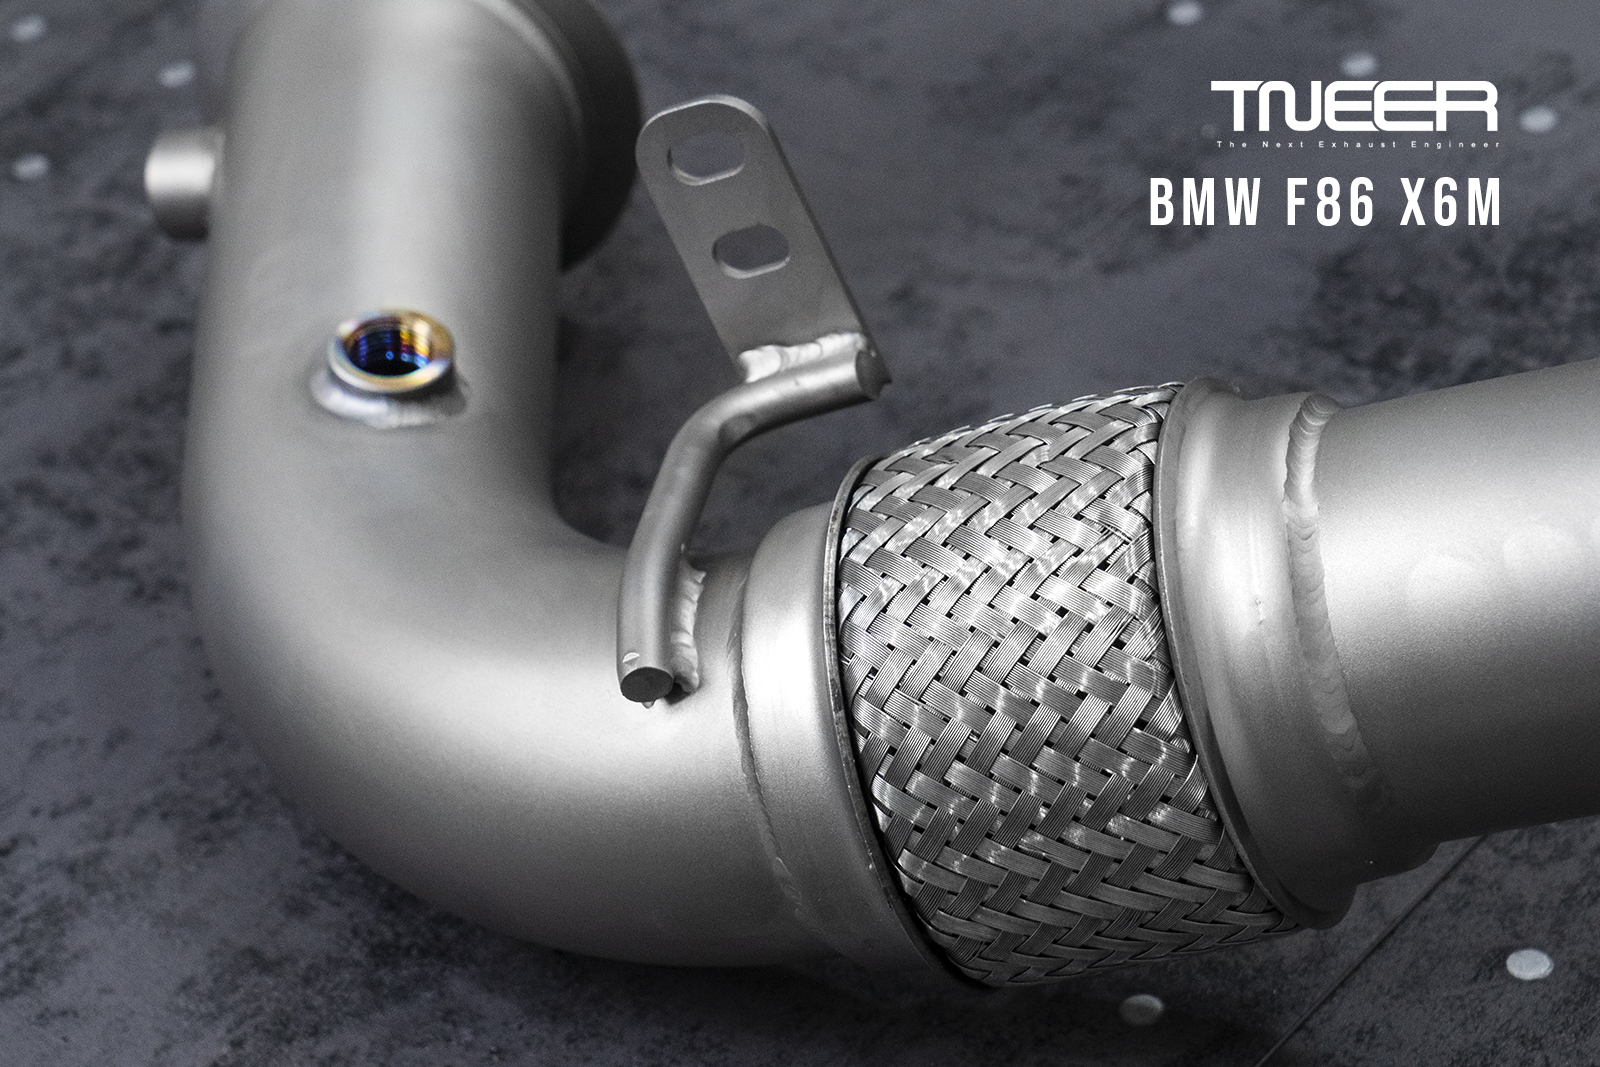 BMW F86 (X6M) TNEER Exhaust System with EV and TACS